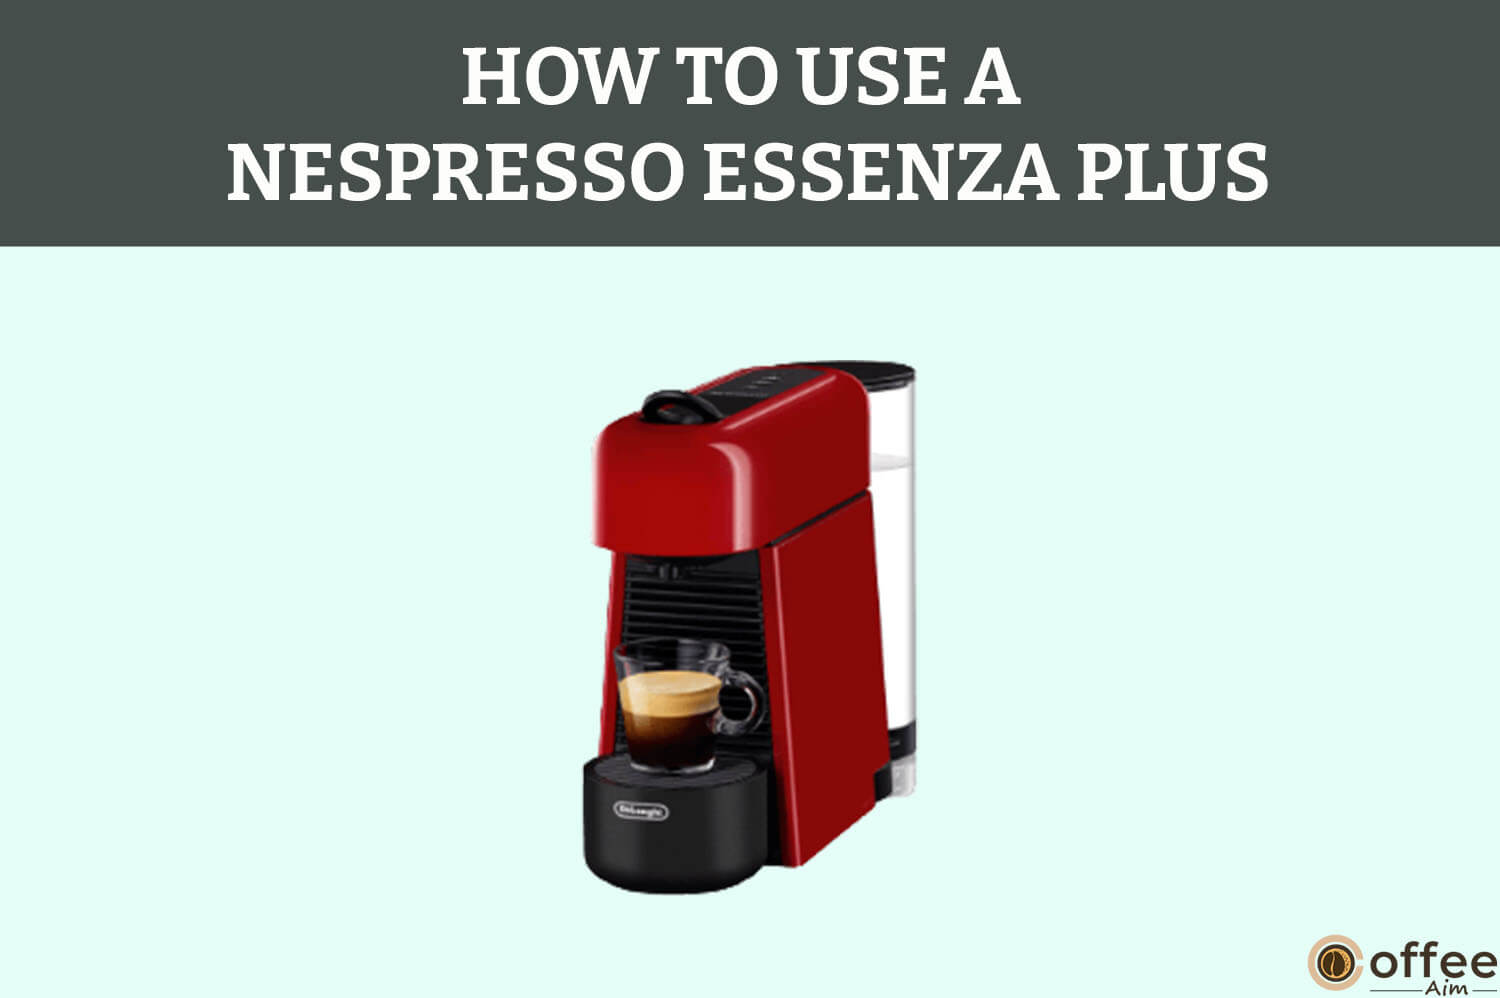 Featured image for the article "How to Use A Nespresso Essenza Plus"